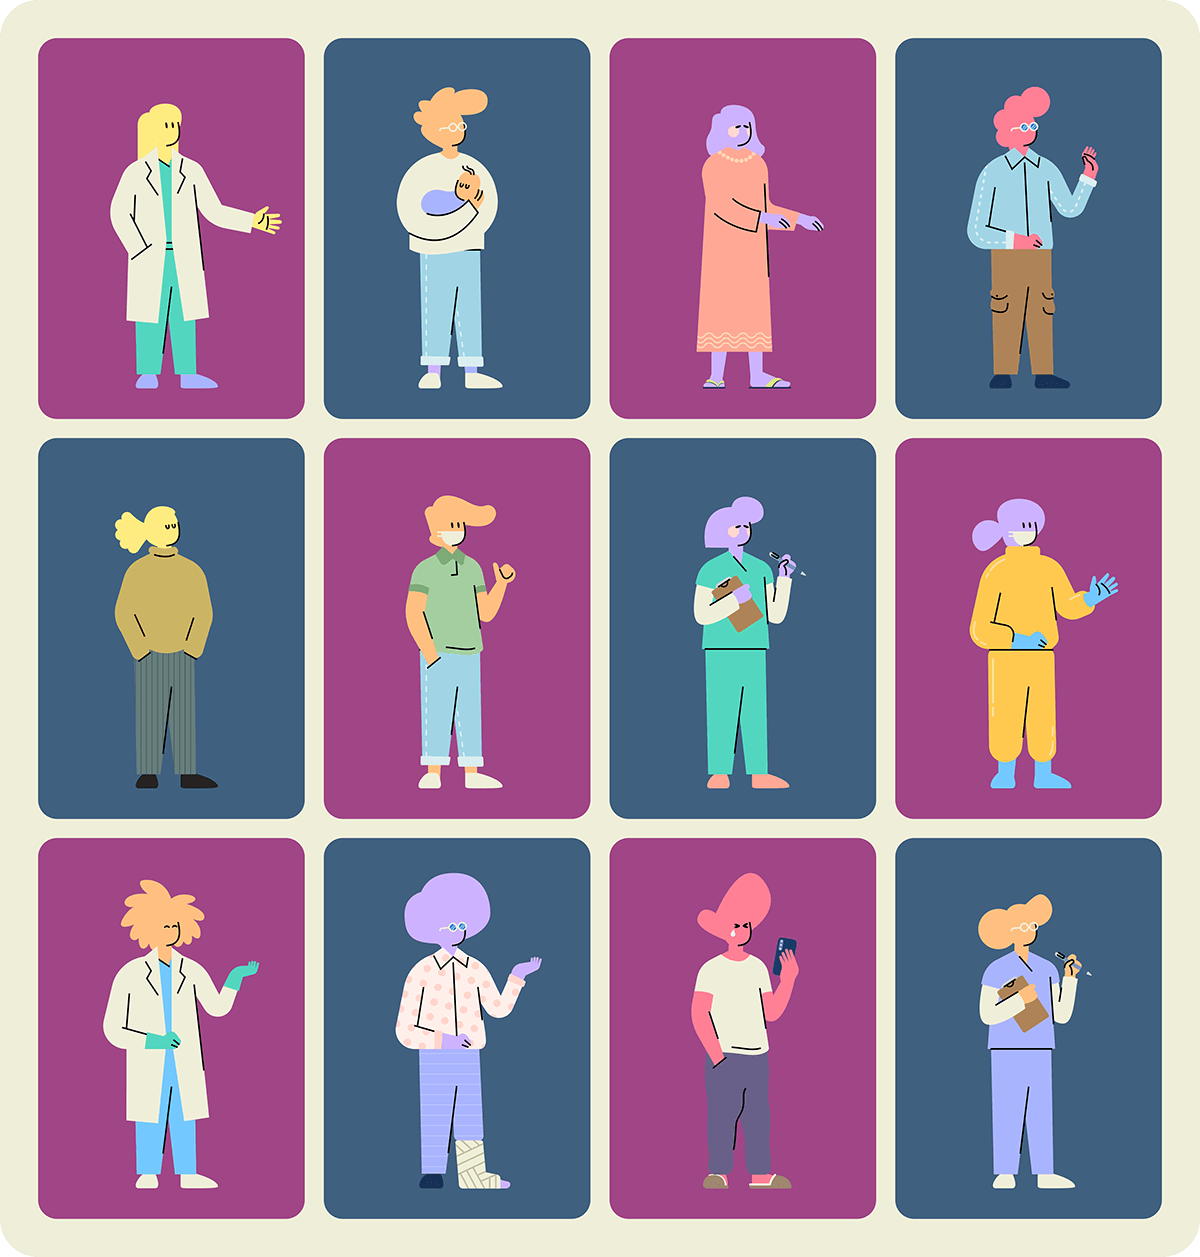 Variations of the healthcare personal.